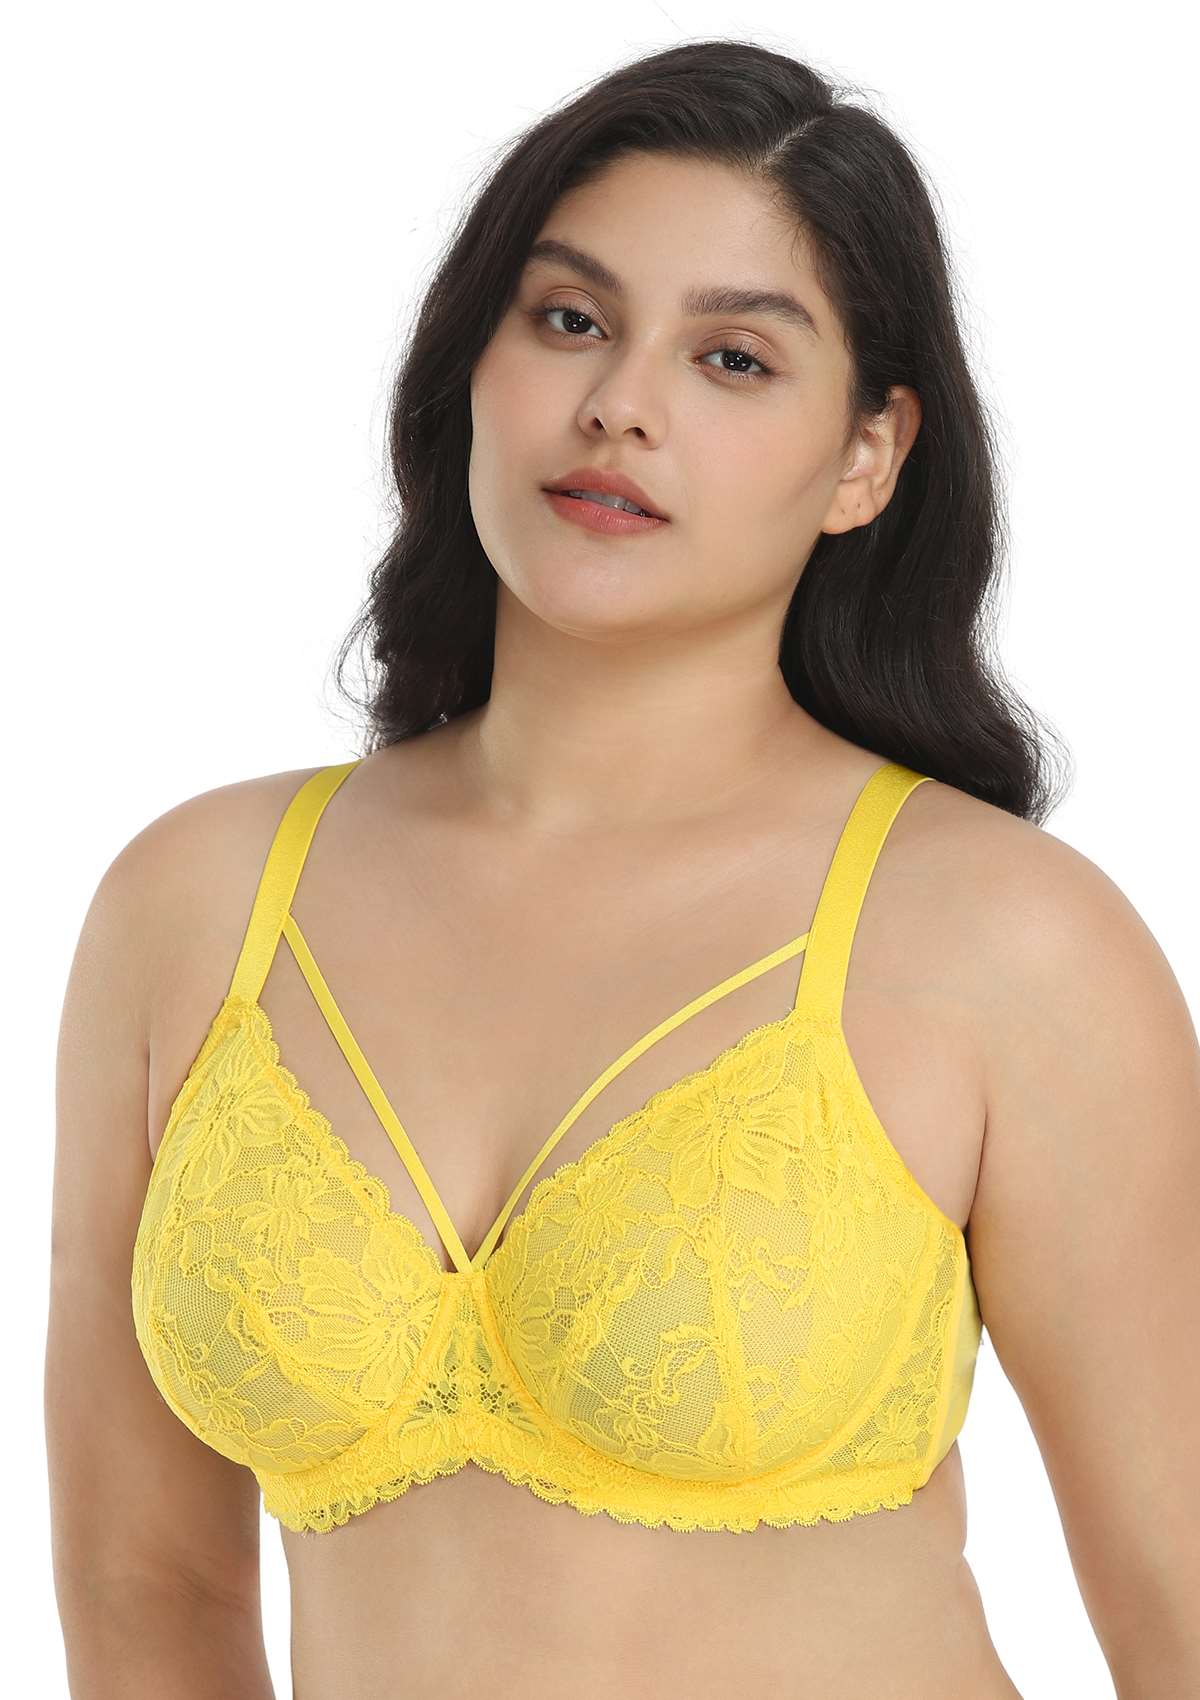 HSIA Unlined Lace Mesh Minimizer Bra For Large Breasts, Full Coverage - Bright Yellow / 40 / DD/E